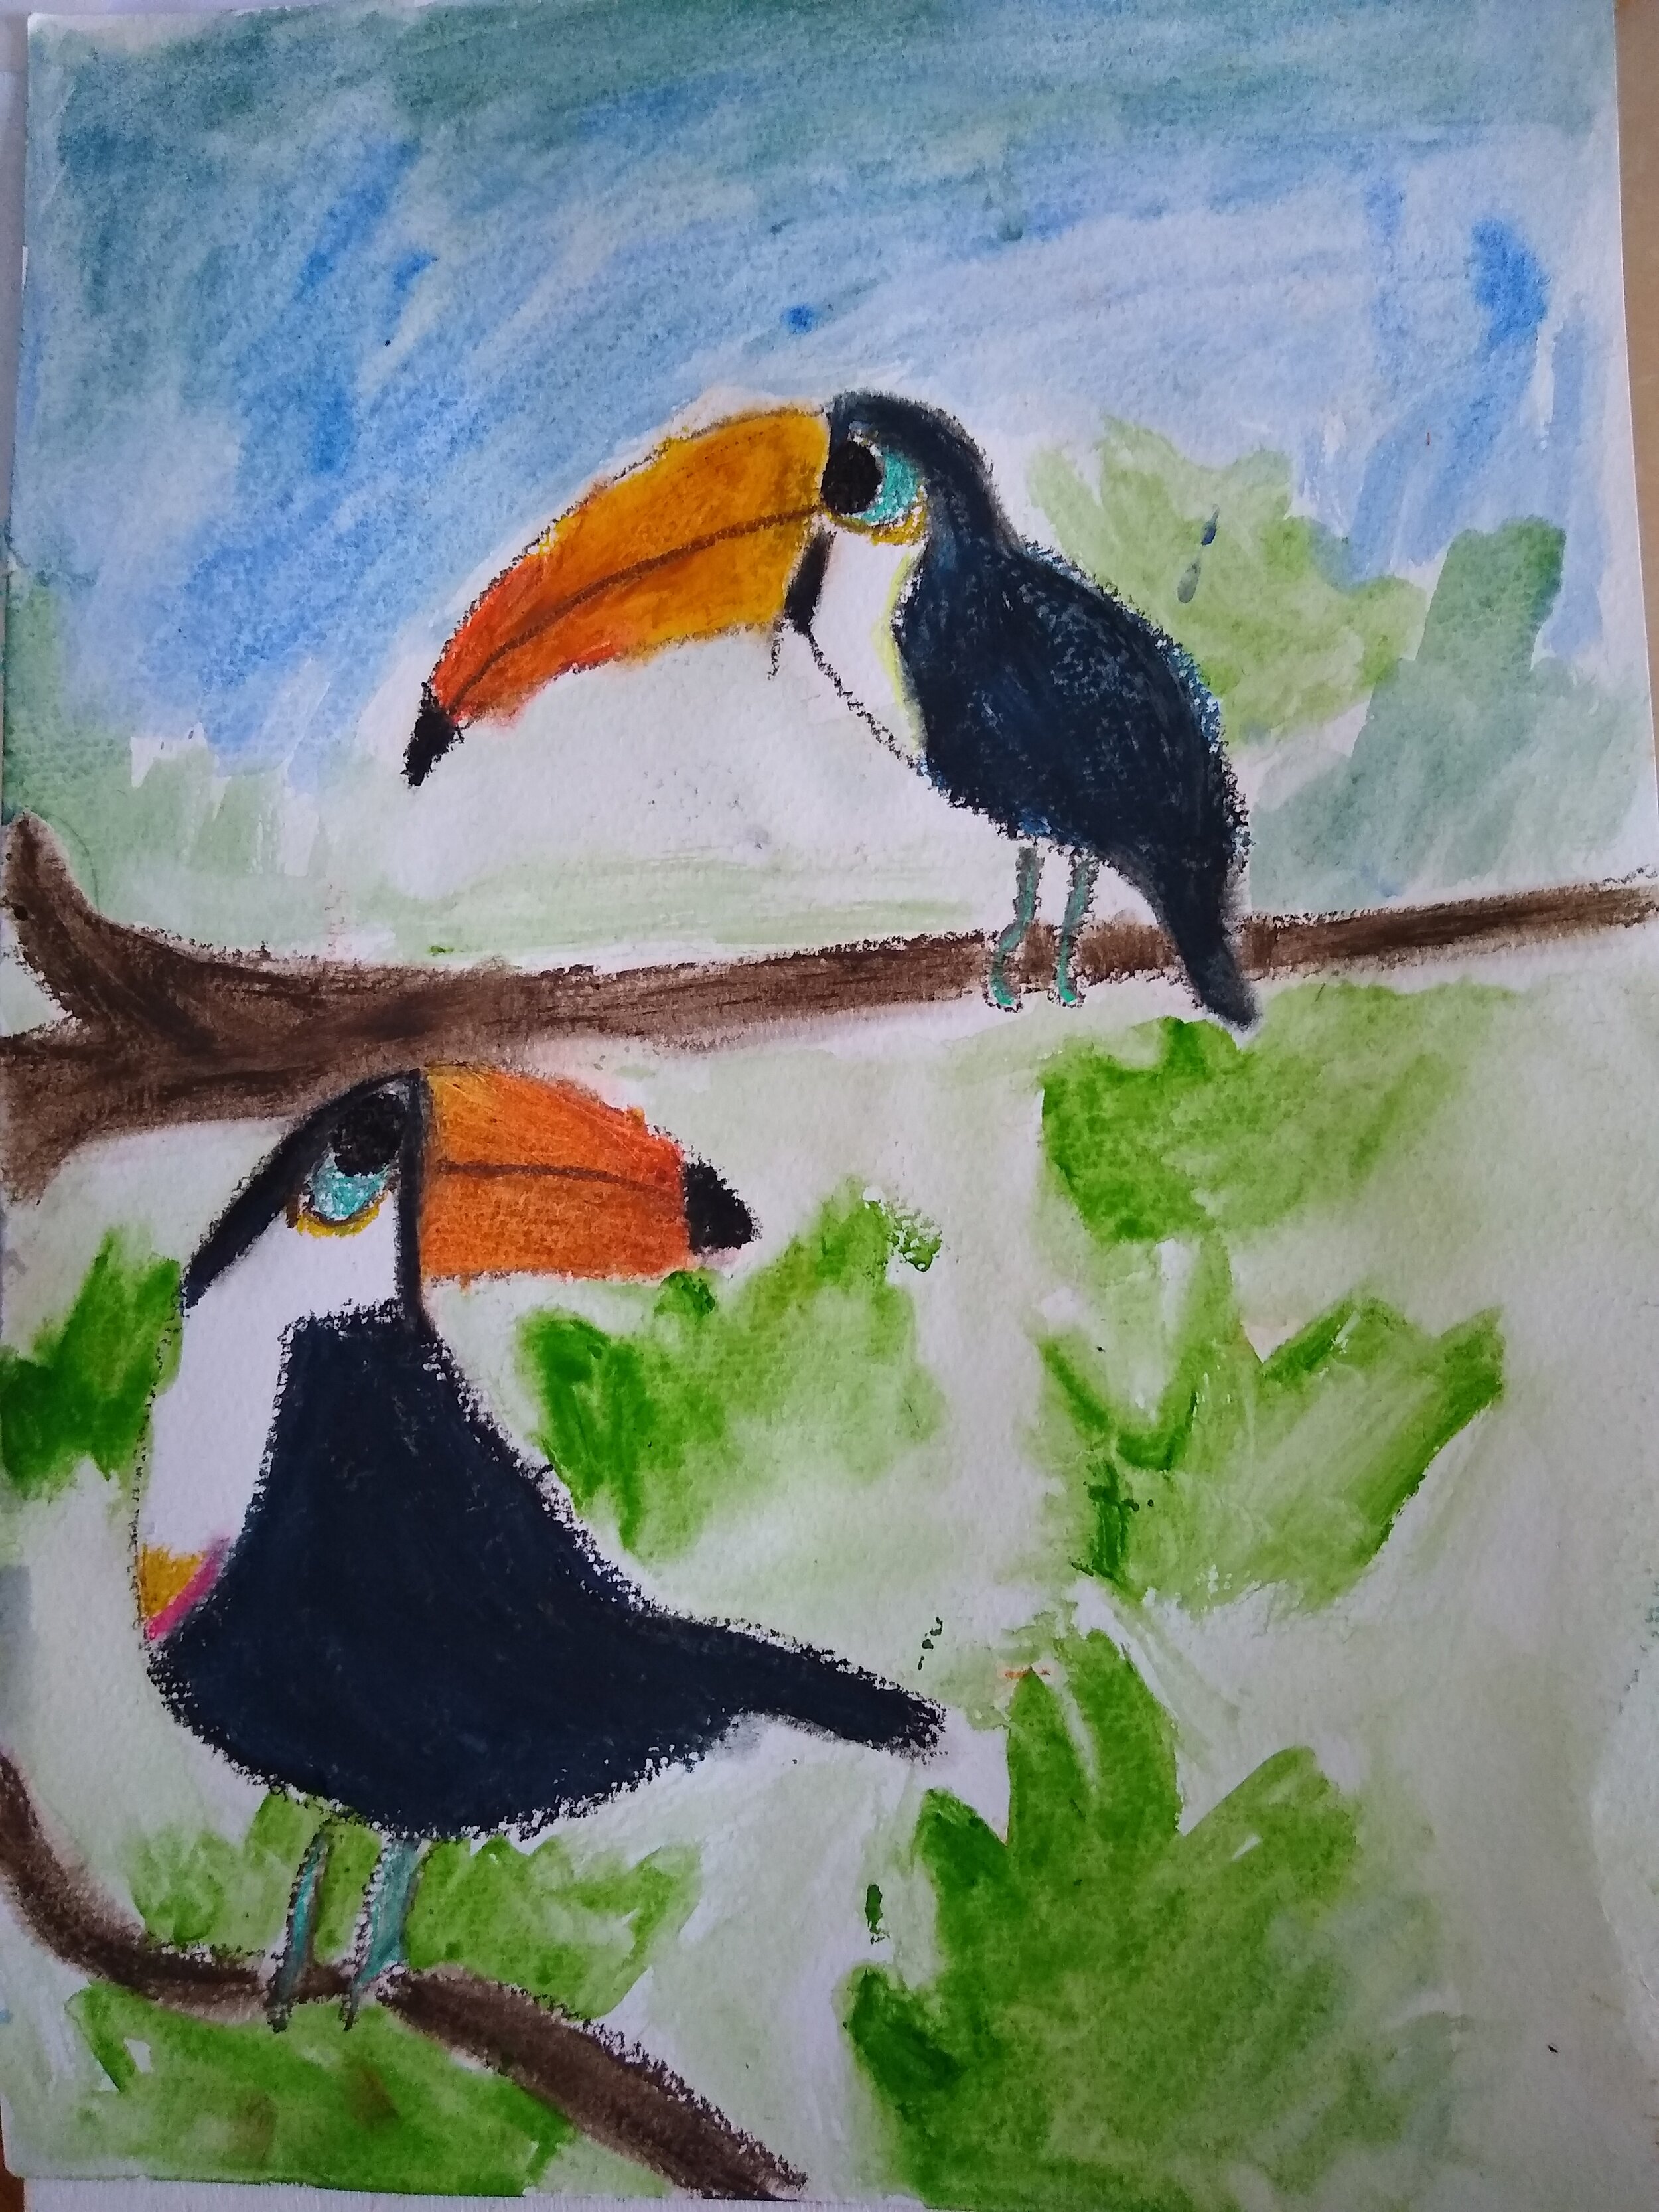 T is for Toucan, by Katelyn